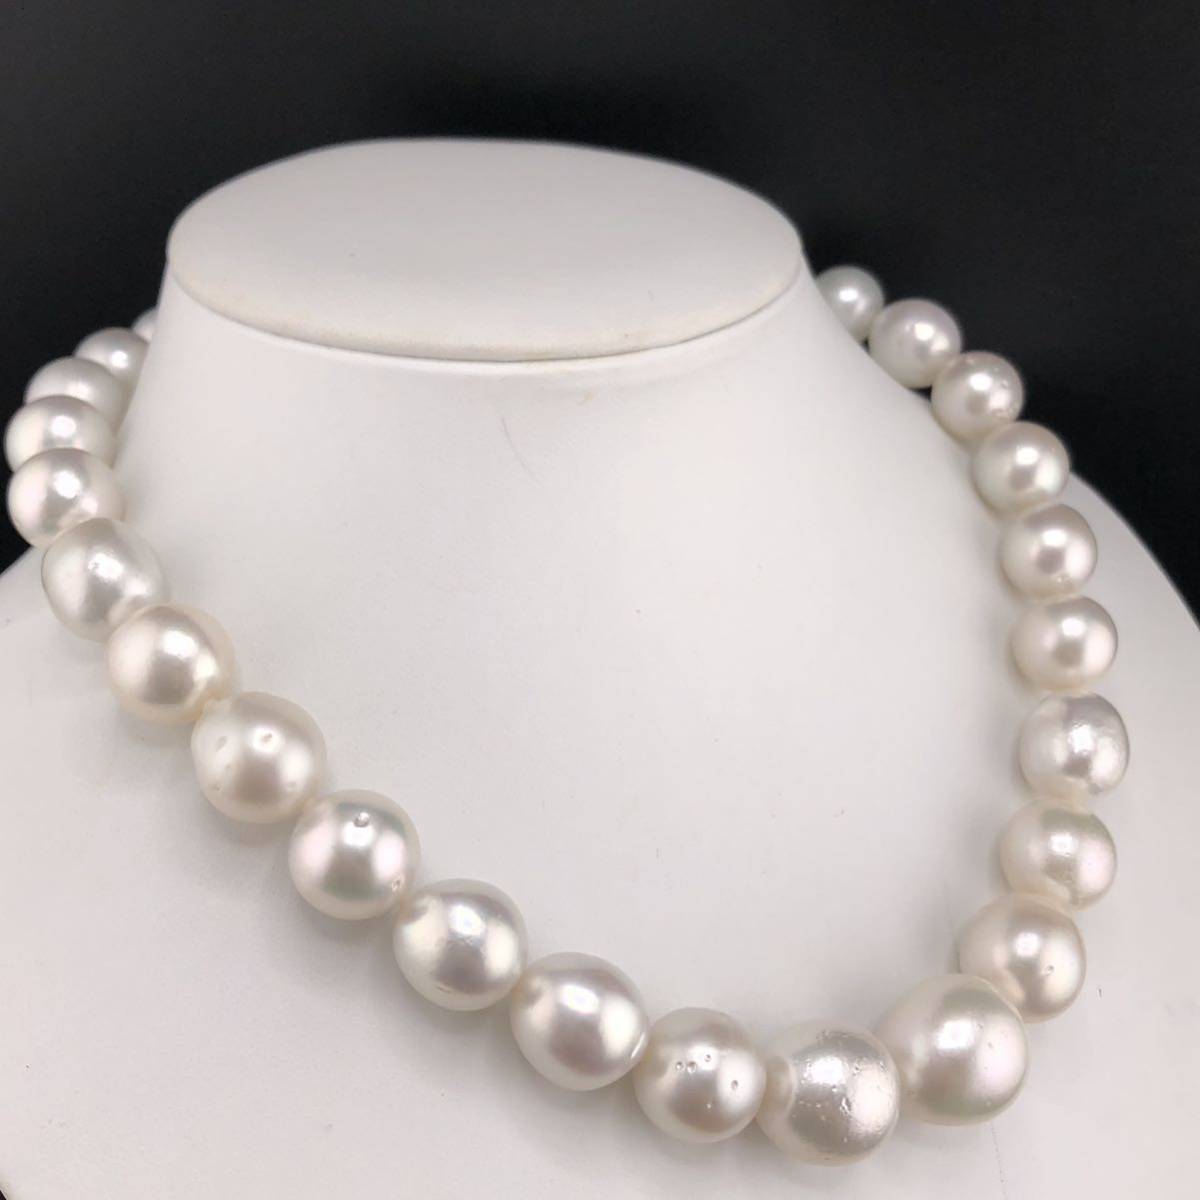 P11-0038 超特大！！南洋パールネックレス 12.0mm~18.00mm 47cm 125.0g (南洋 Pearl necklace SILVER )_画像2